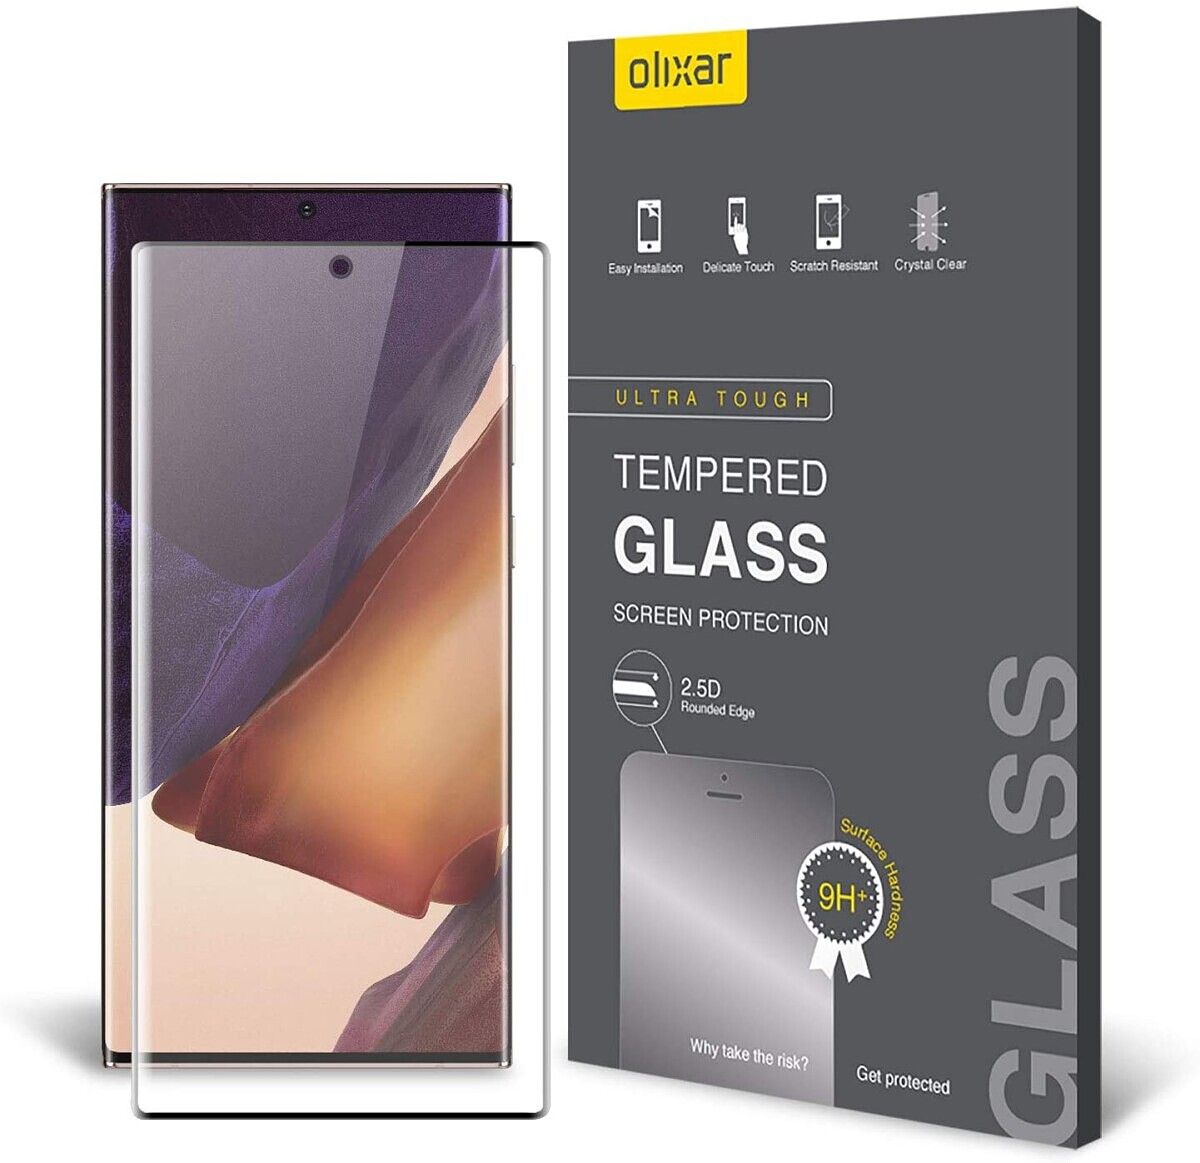 Olixar is another reputable brand in screen protectors, and you can pick up one of their tempered glass protectors for the Samsung Galaxy Note 20 Ultra now!